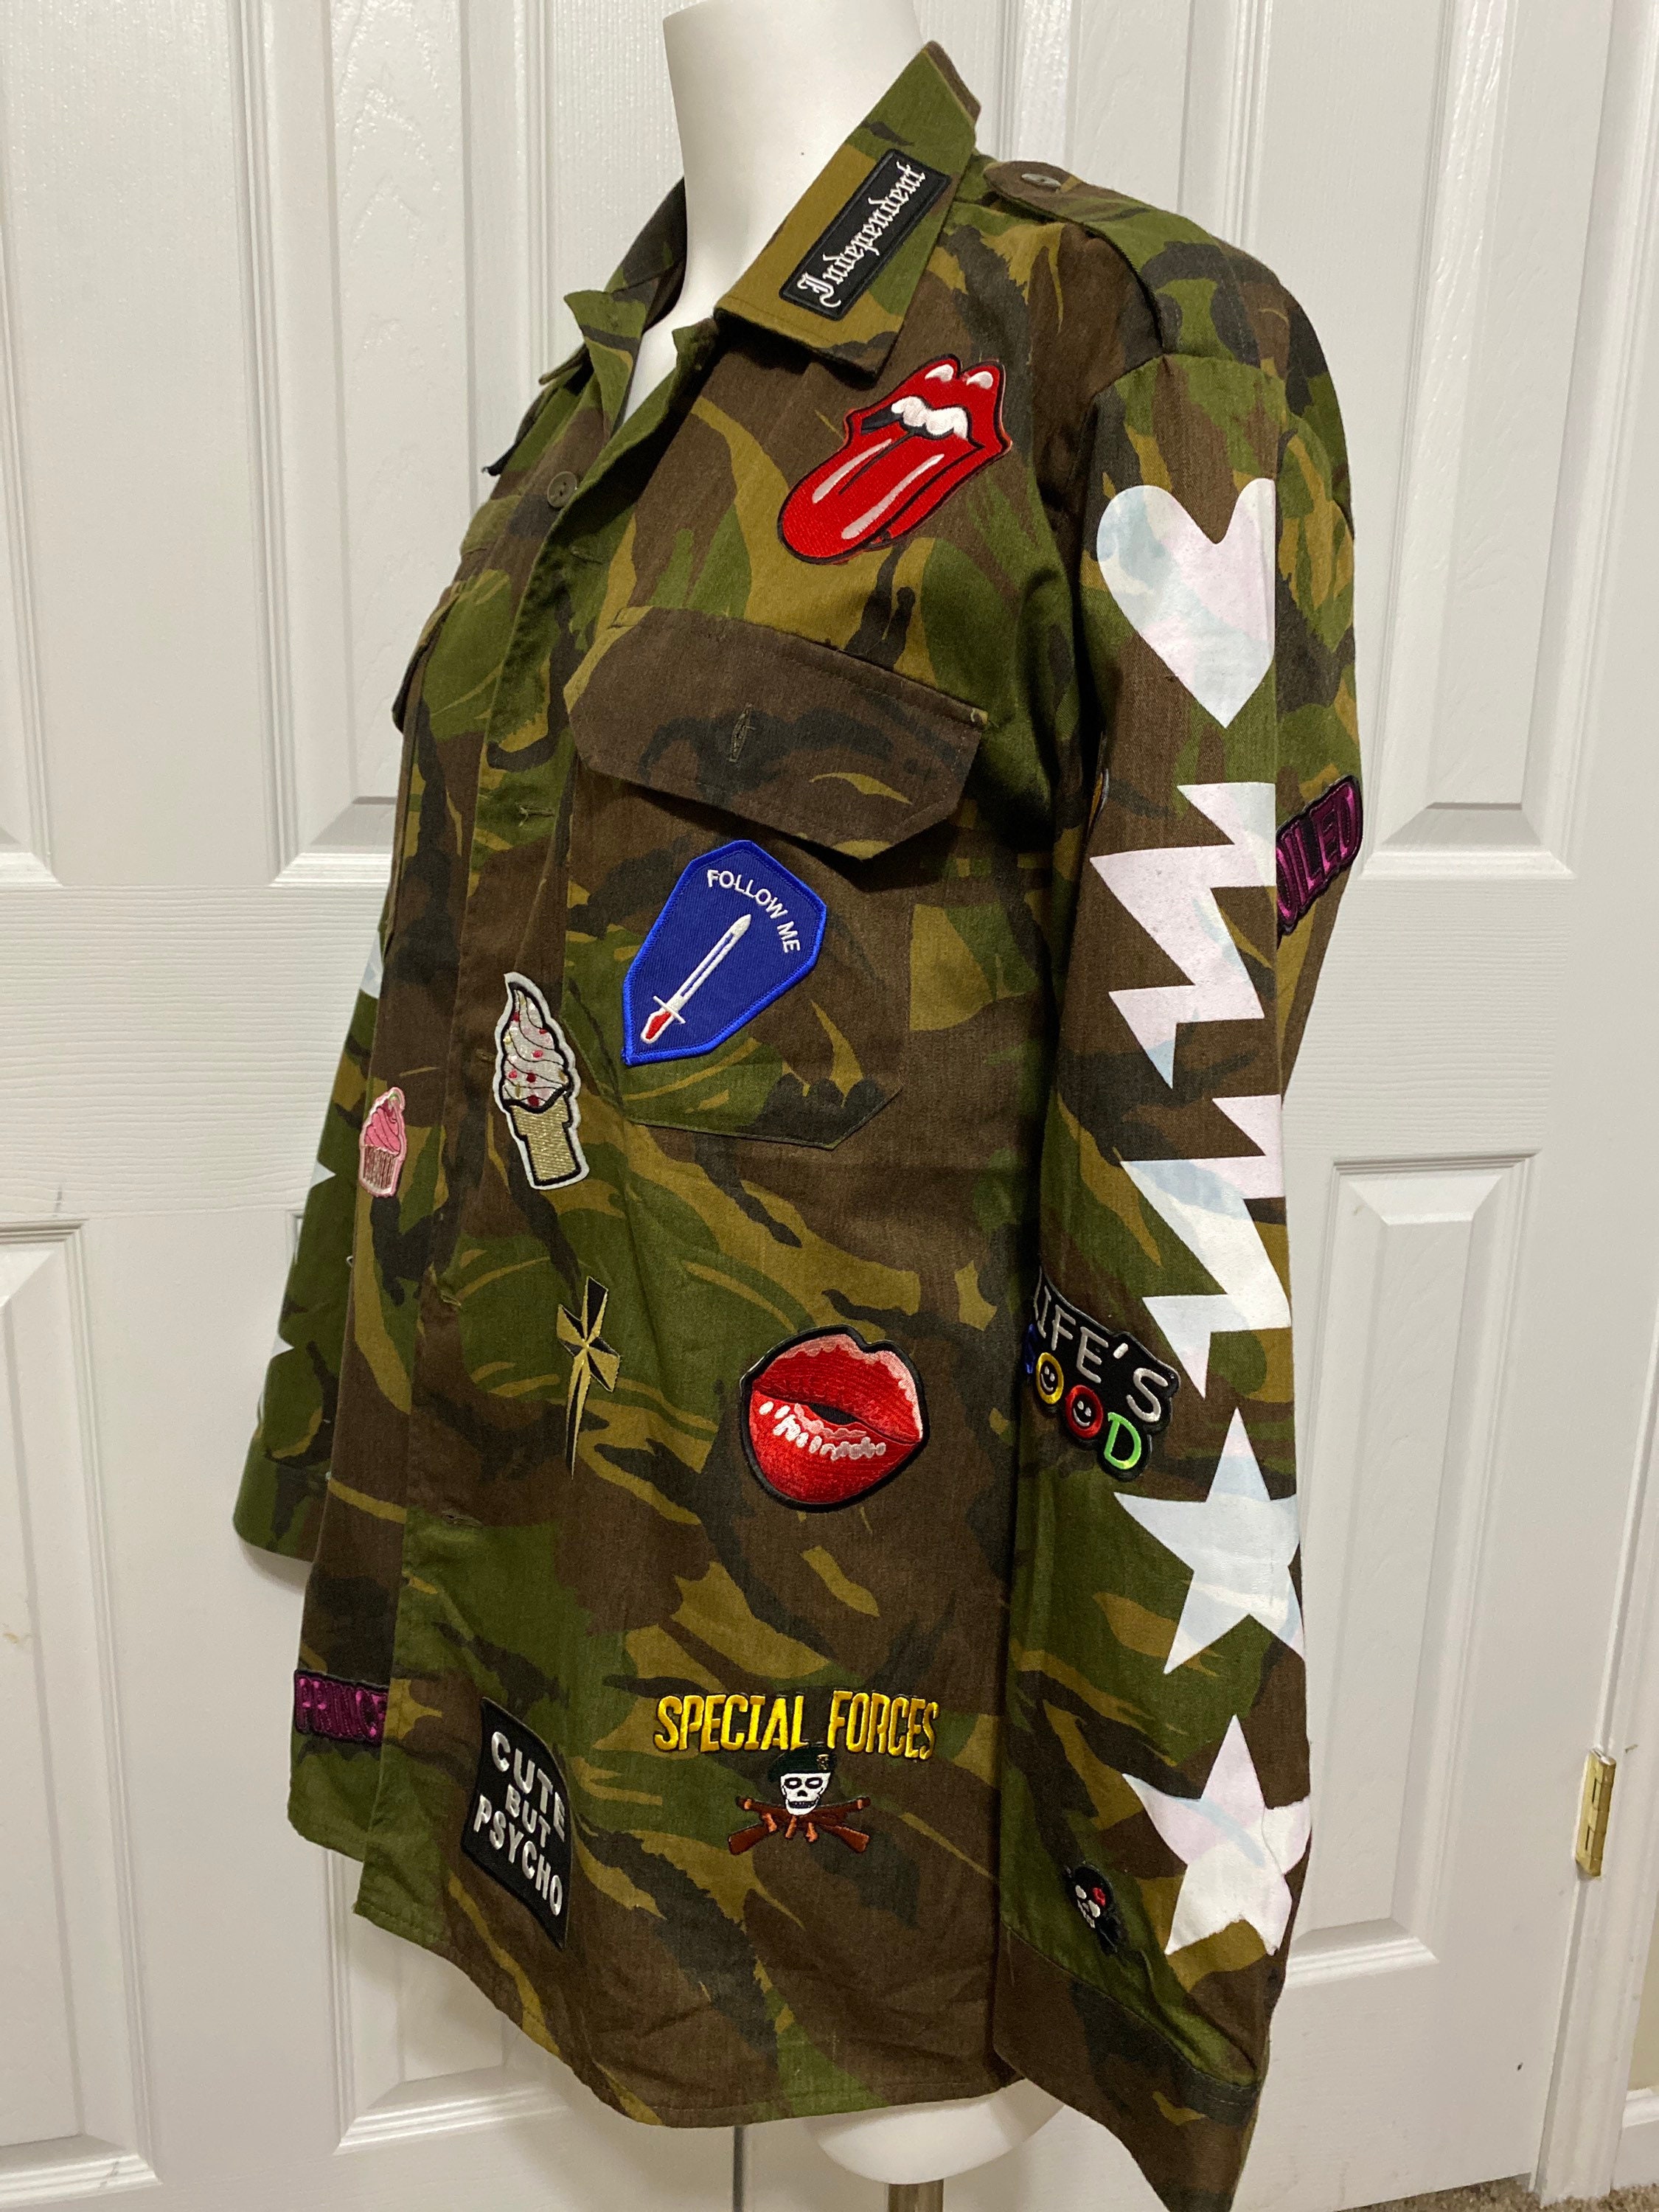 Smurfillionaire Forbes - Hand-Painted Camo Jacket